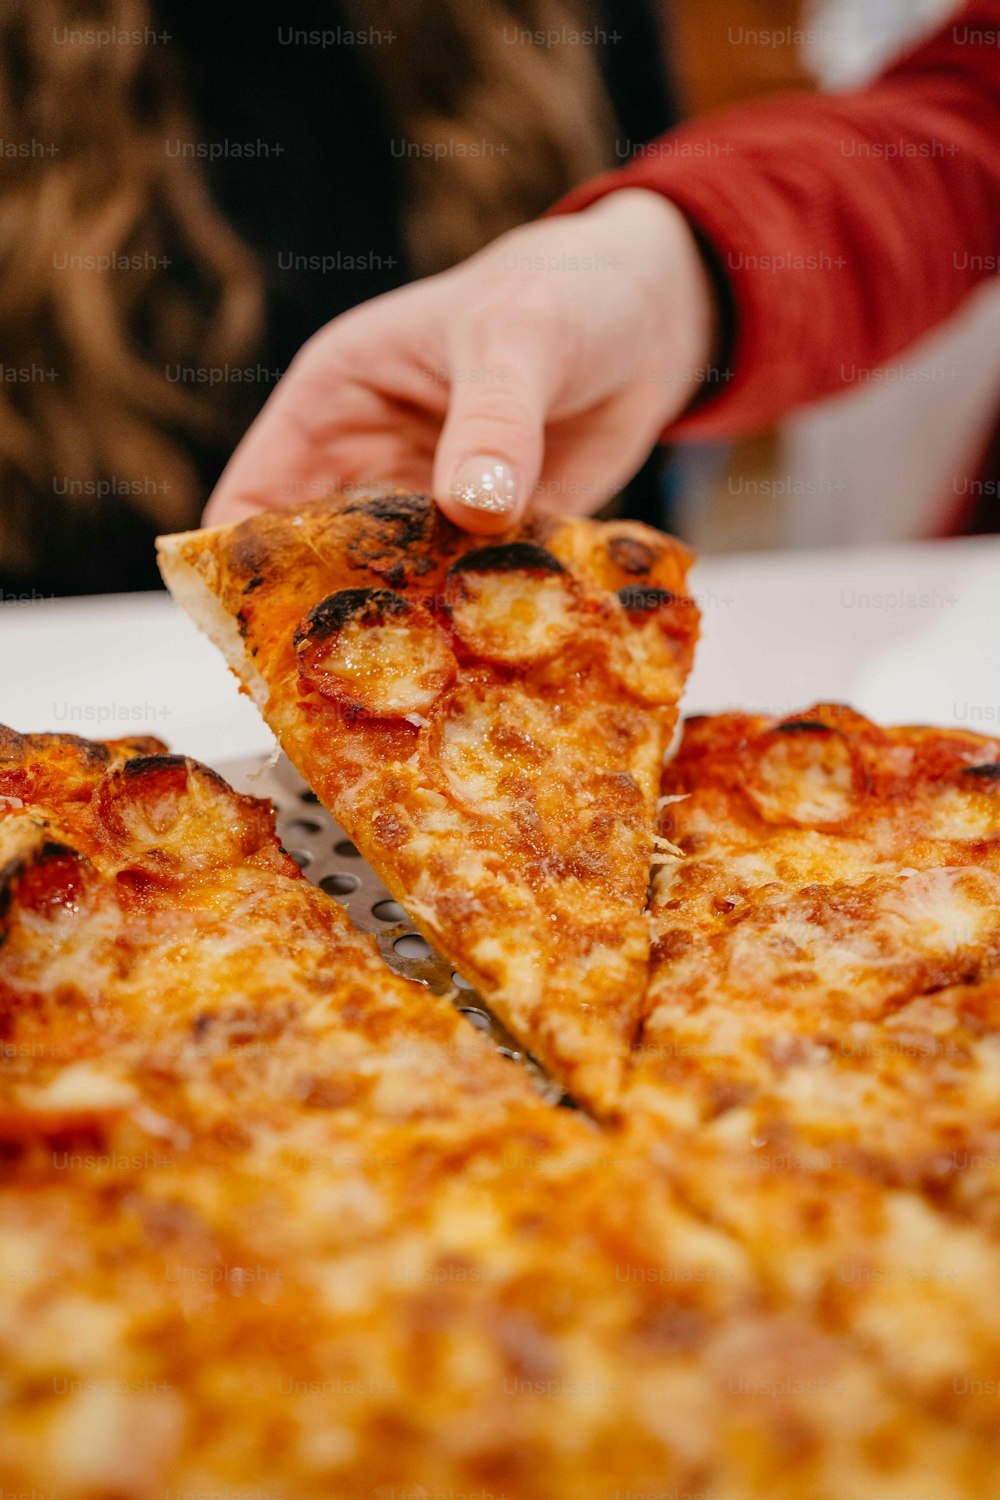 a person cutting a slice of pizza with a knife